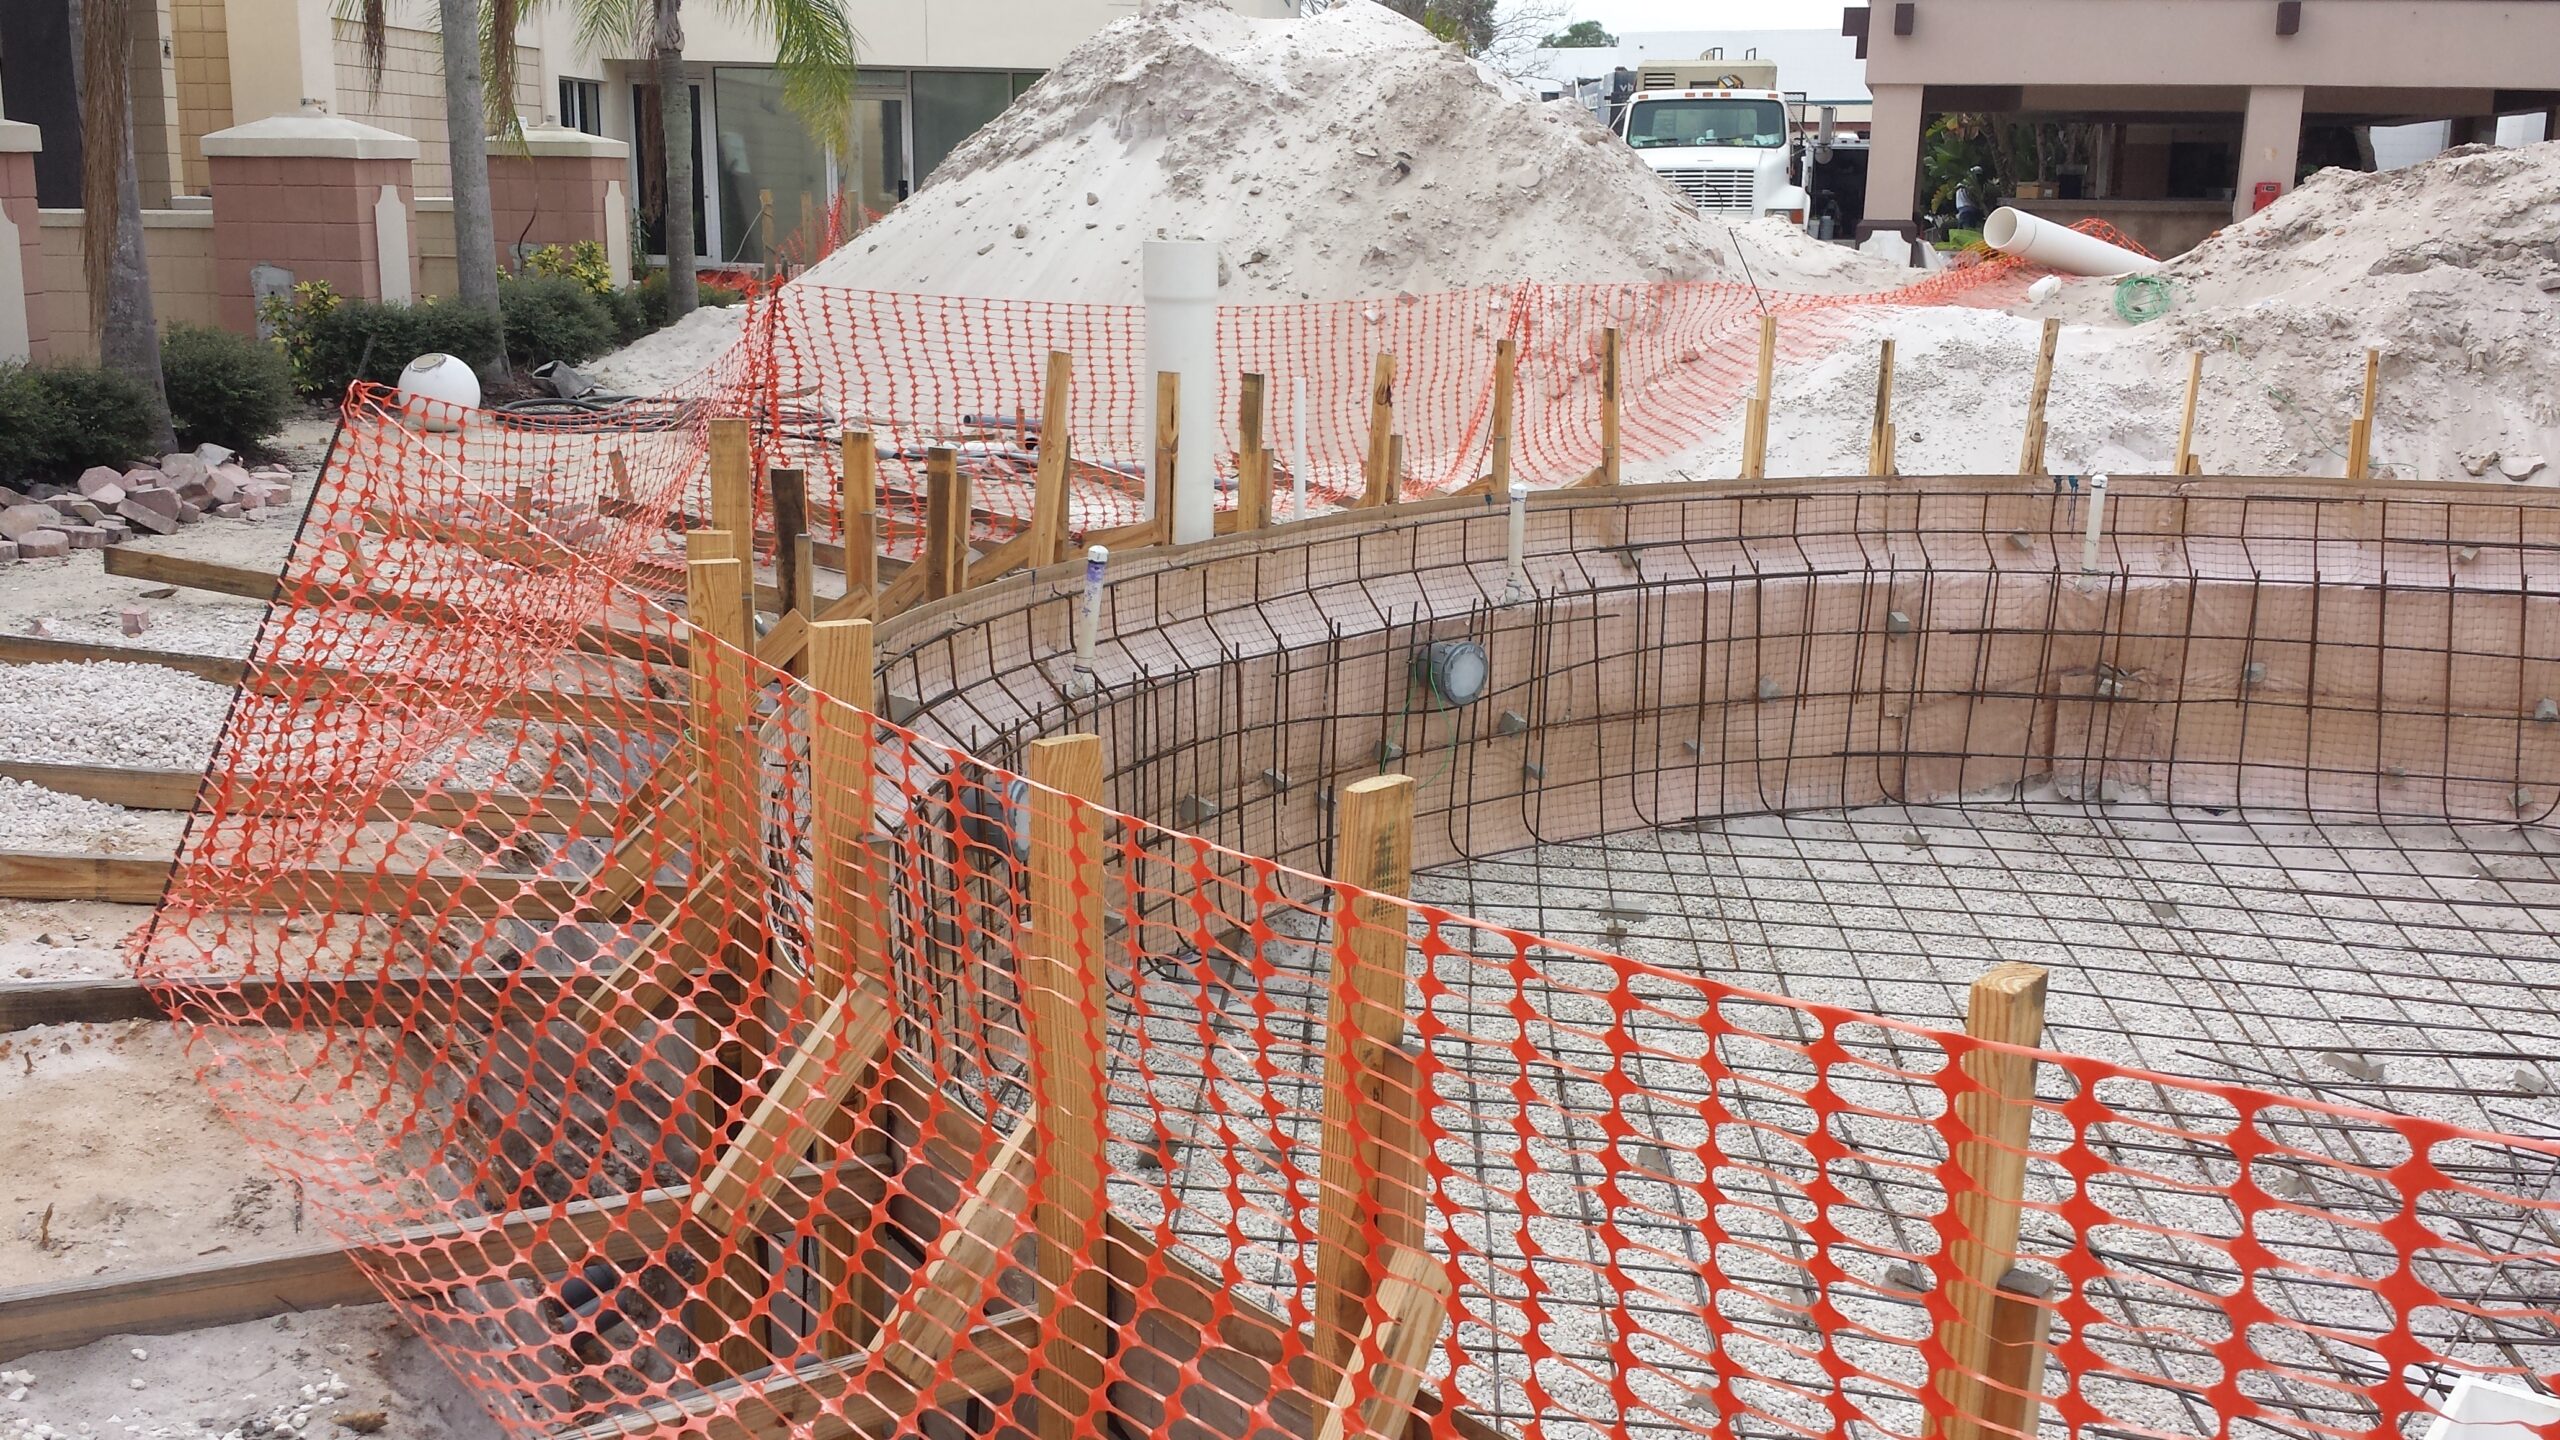 Orange netting surrounding a pool being constructed